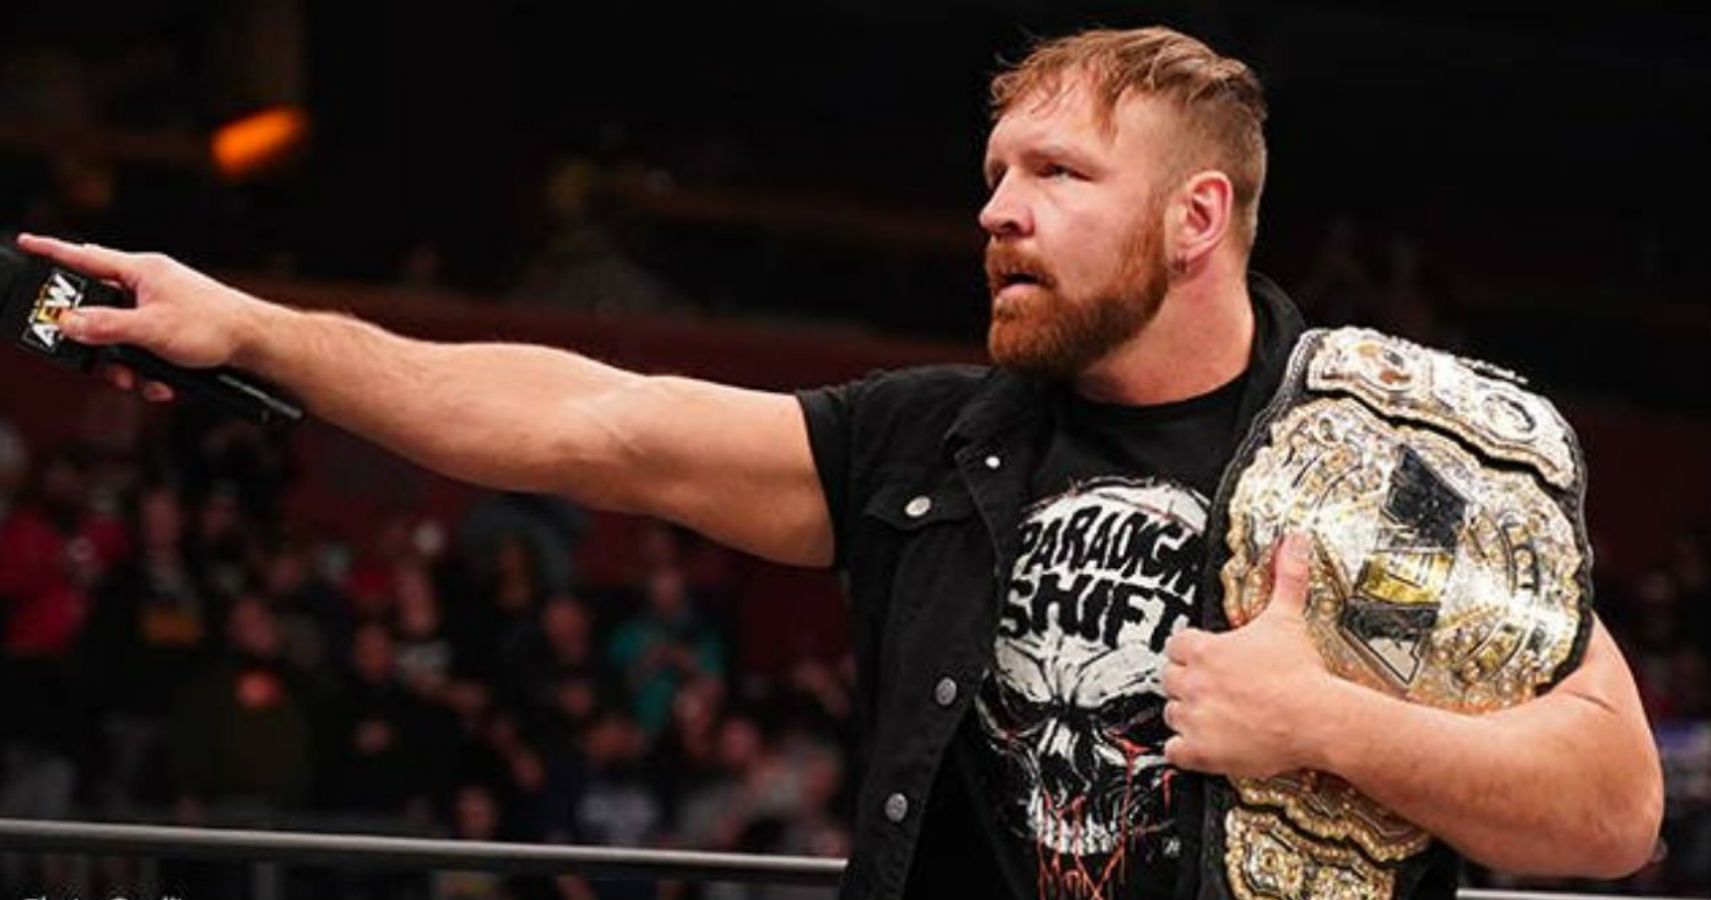 Jon Moxley Made A Cameo Appearance On WWE TV This Week [Video]